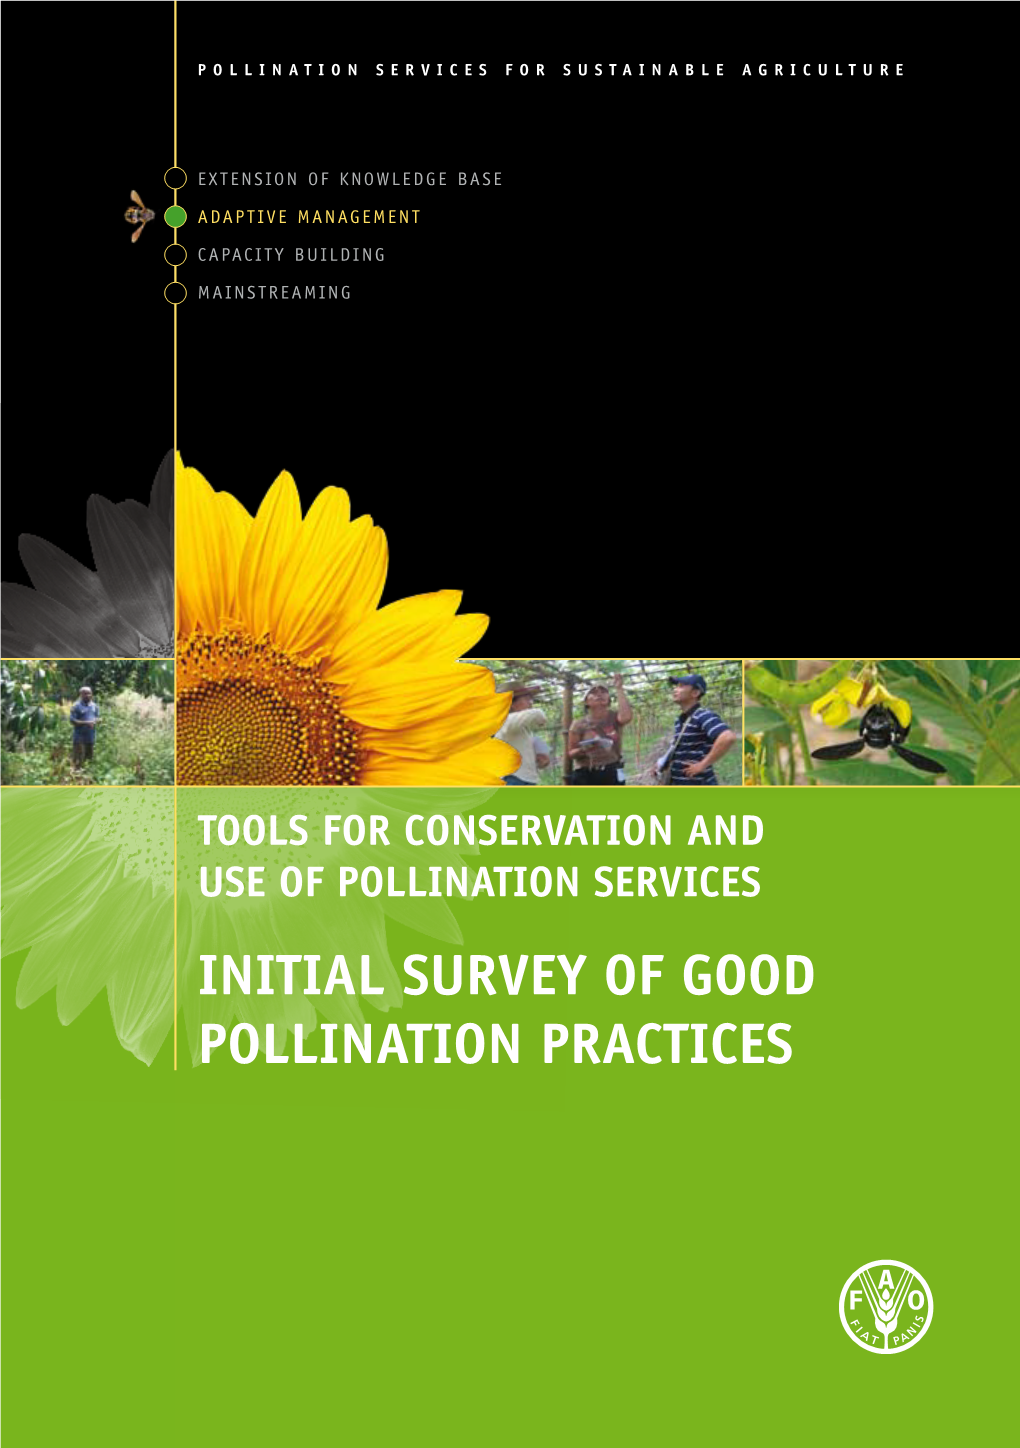 Initial SURVEY of GOOD POLLINATION PRACTICES POLLINATION SERVICES for SUSTAINABLE AGRICULTURE